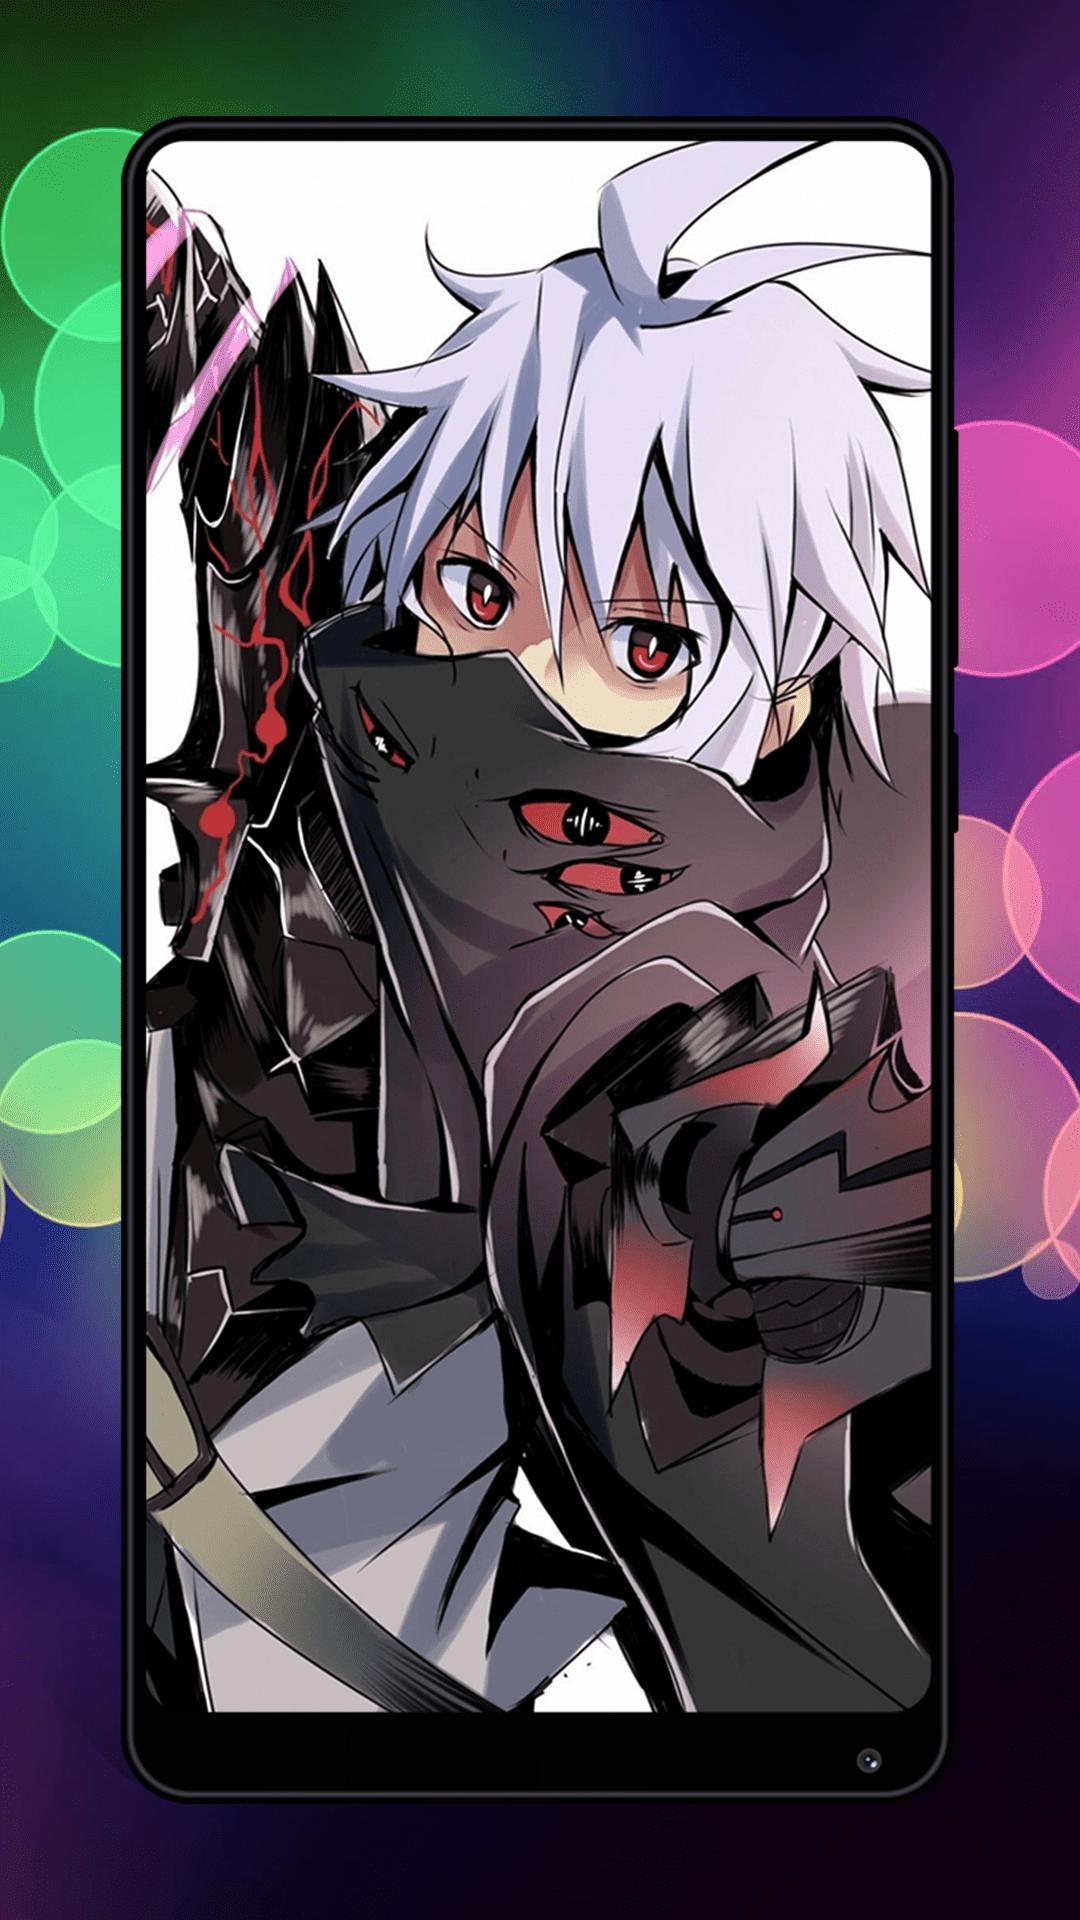 Anime Wallpapers 4k Ultra Hd For Android Apk Download